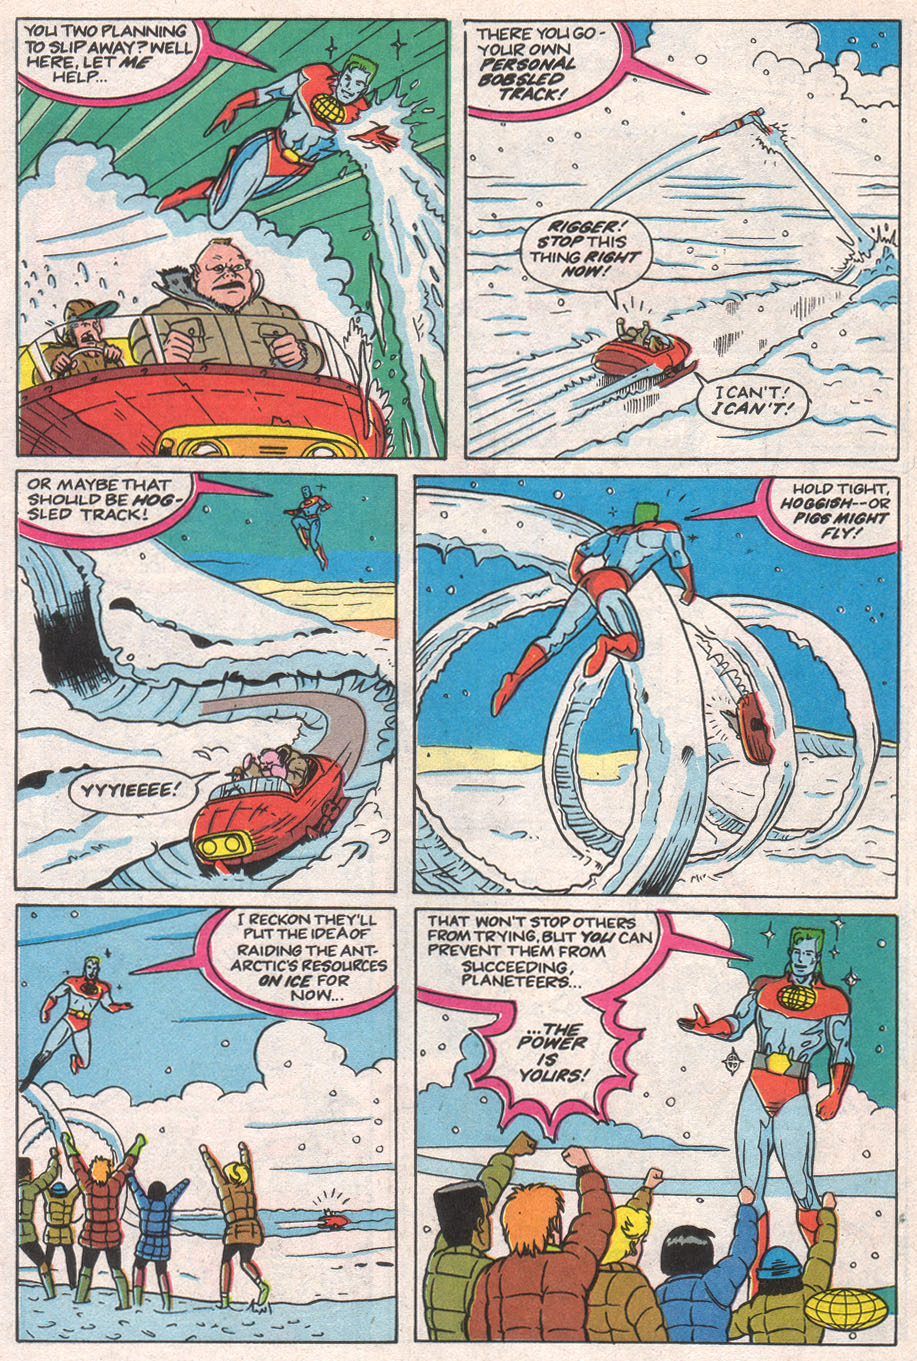 Captain Planet and the Planeteers 11 Page 20